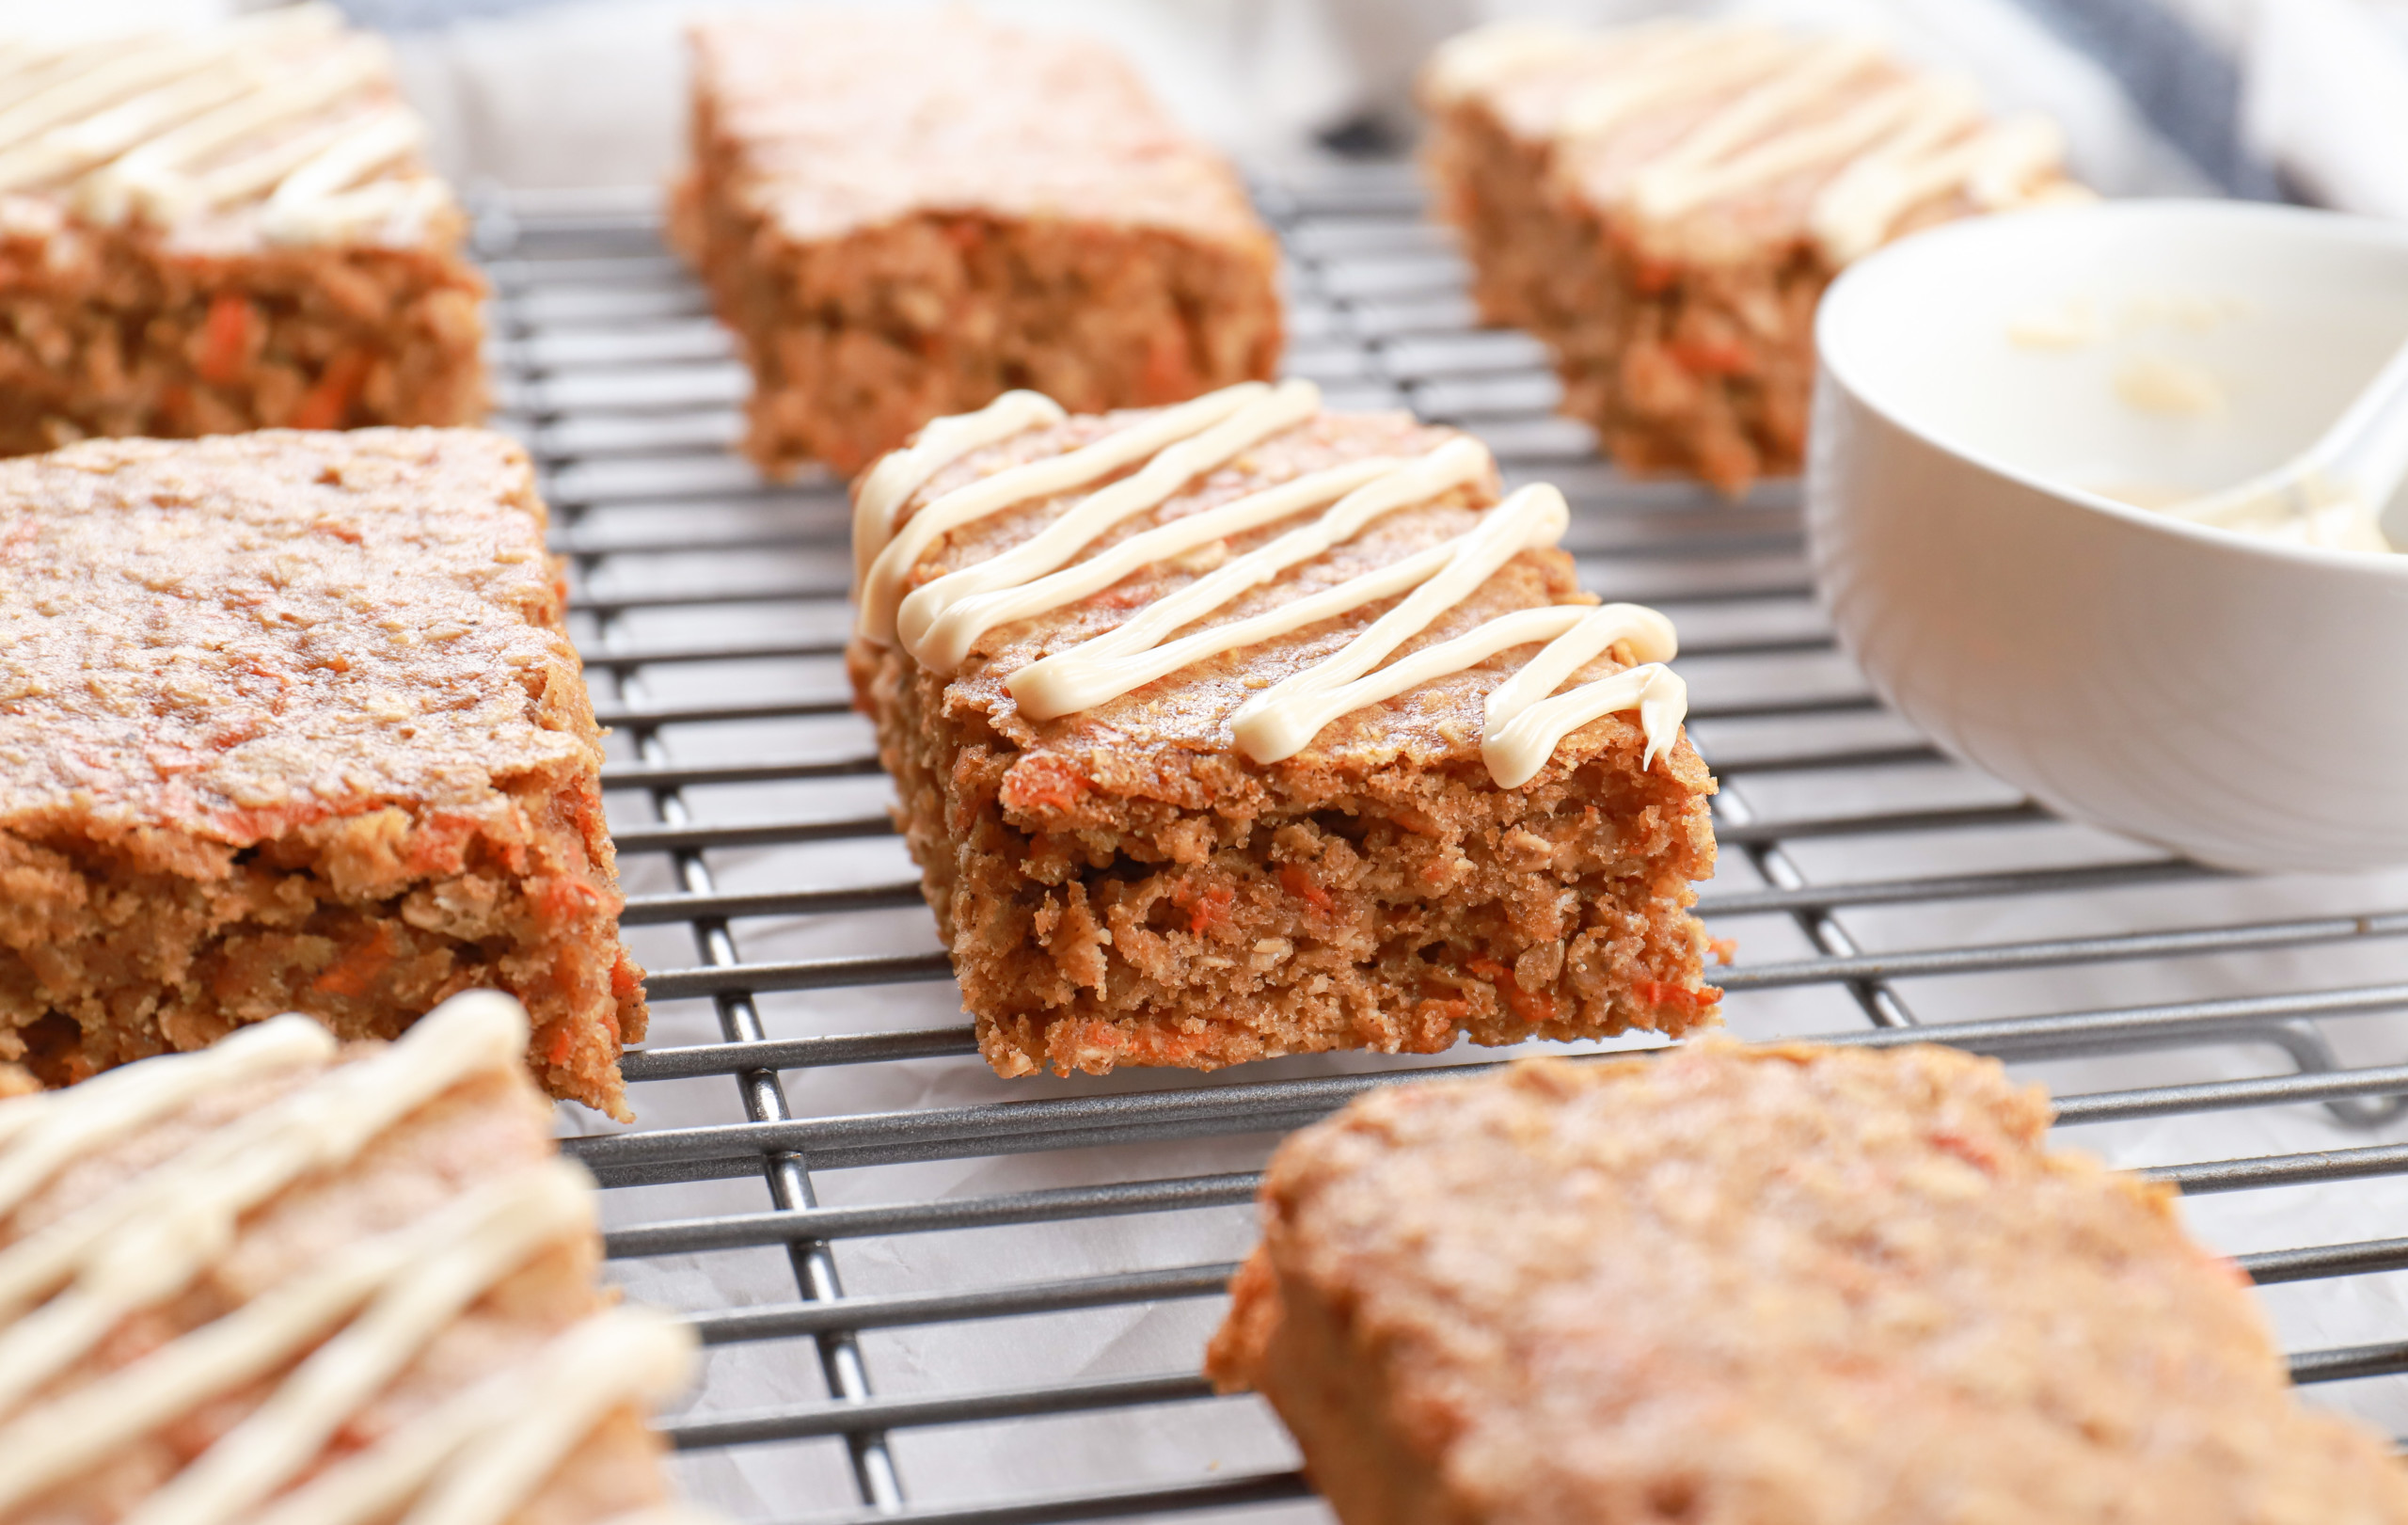 Side view of a soft baked carrot cake oat bar on a cooling rack with more bars in the background.